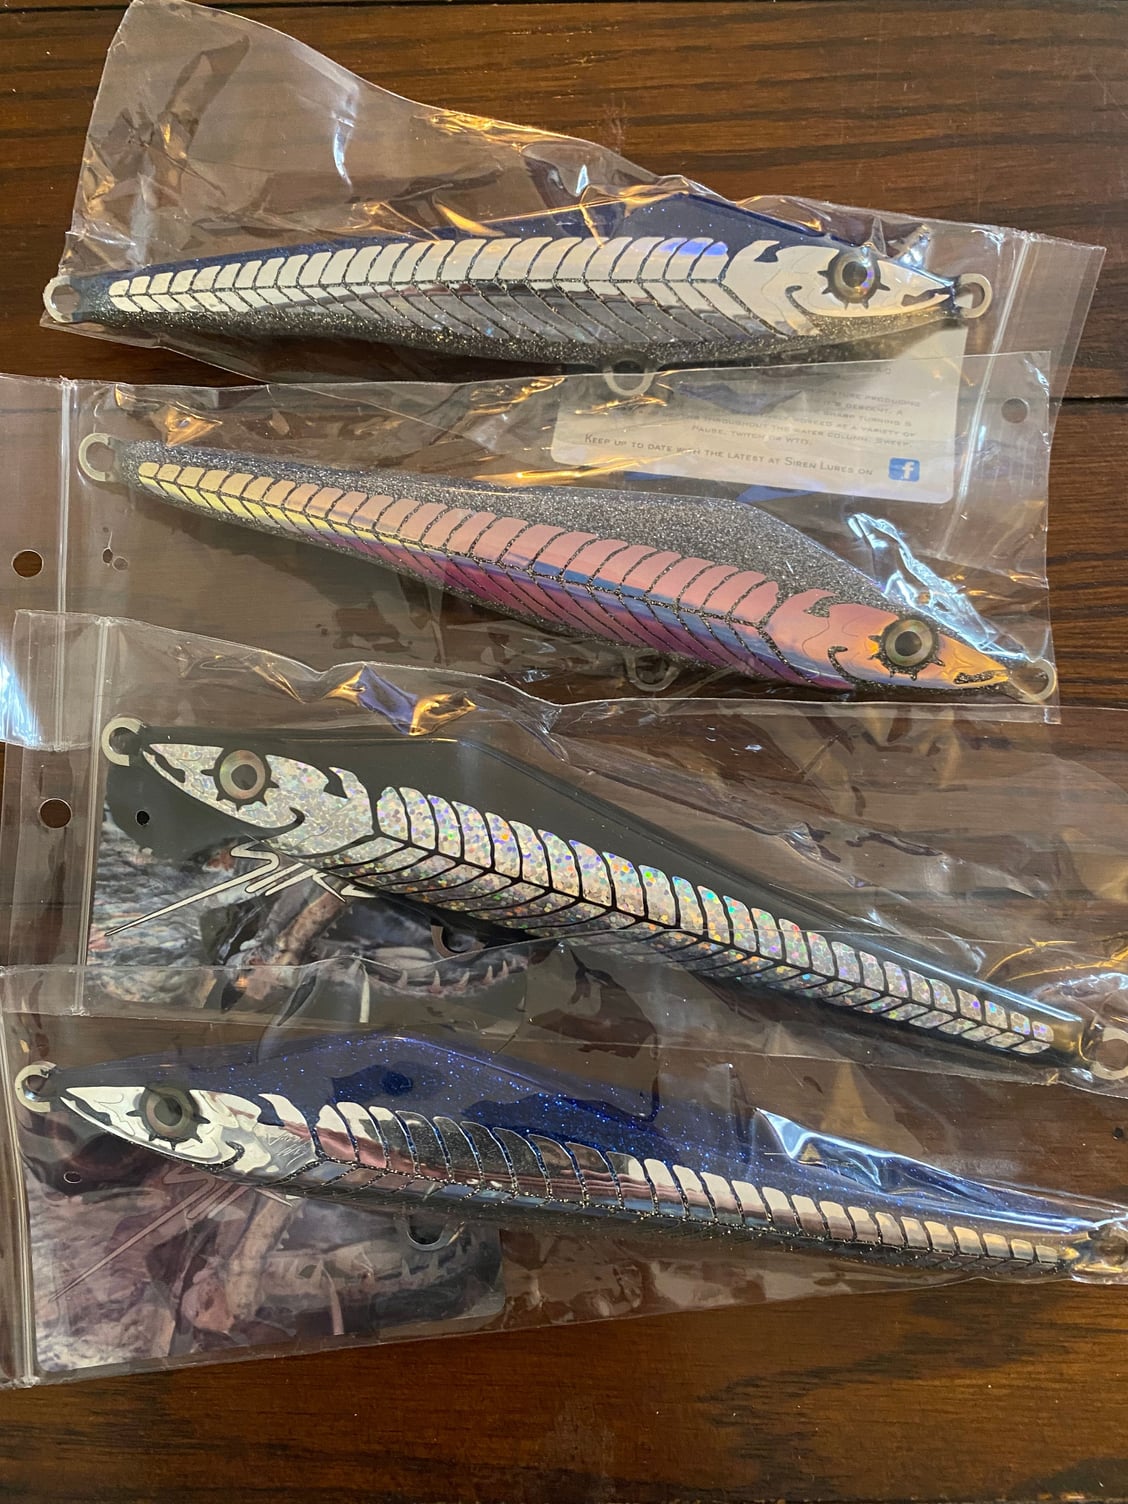 SIREN stickbaits - The Hull Truth - Boating and Fishing Forum